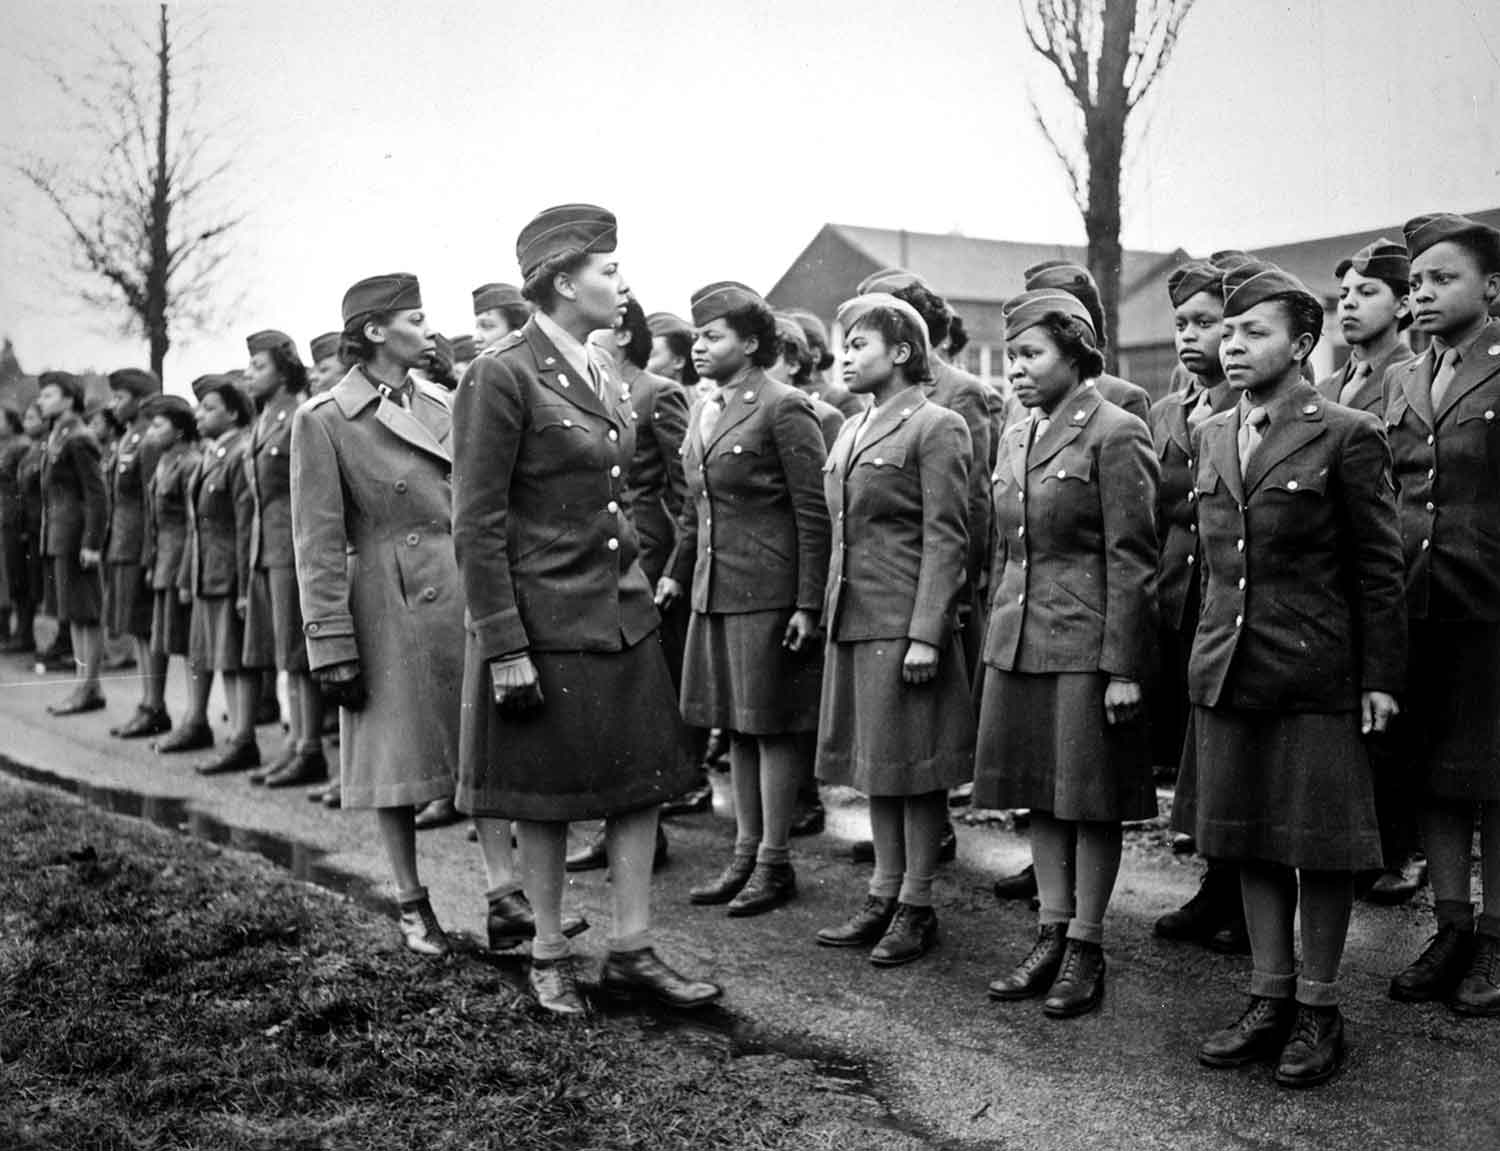 Two women in uniforms stand before a group of women lined up in rows.